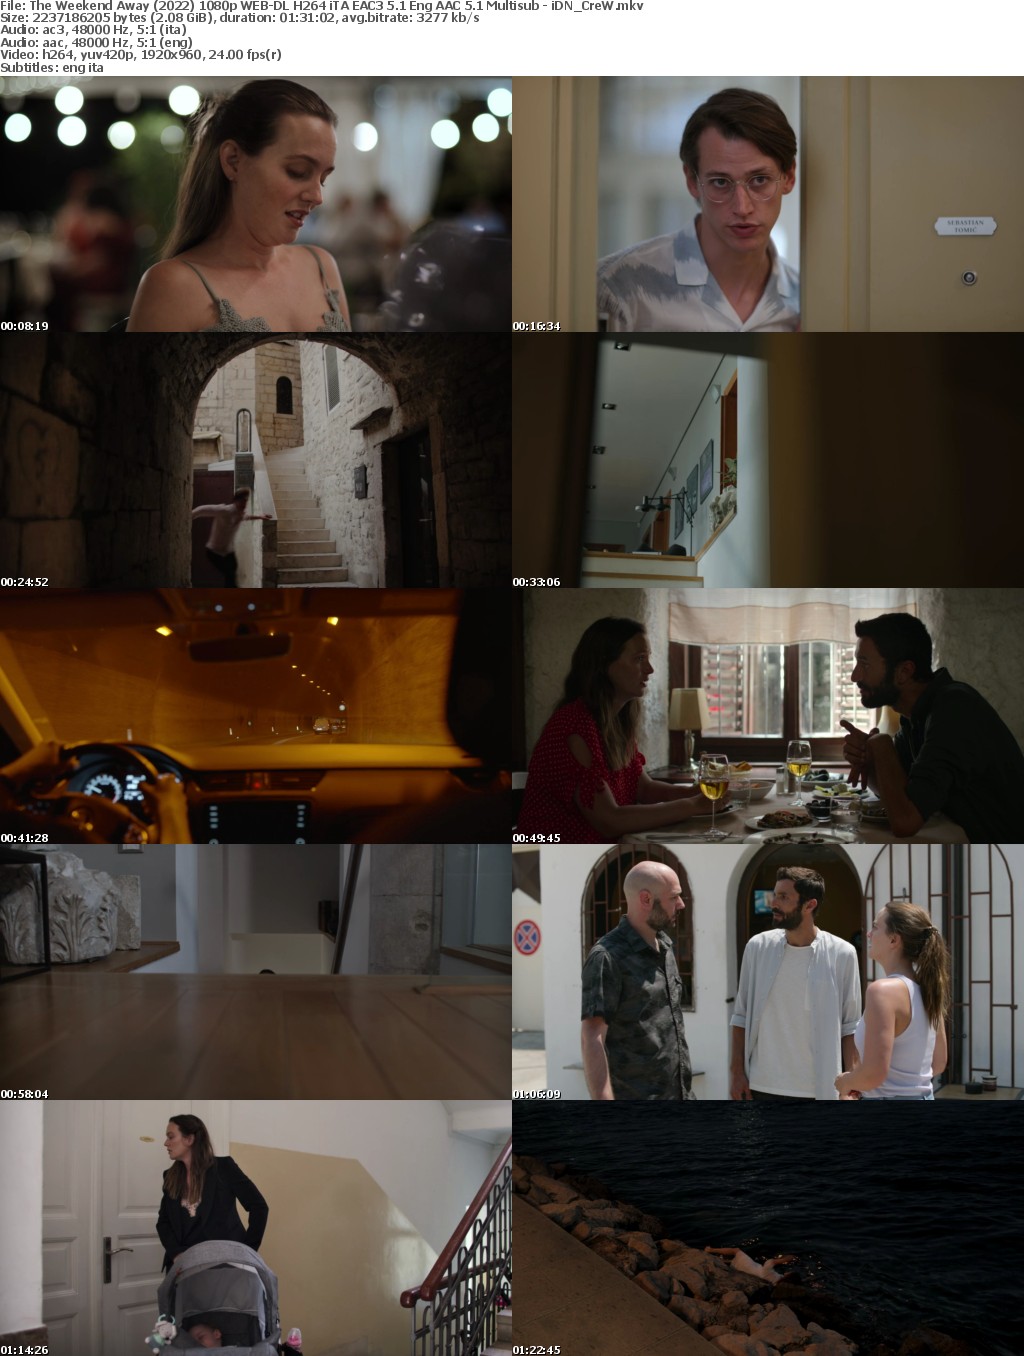 The Weekend Away (2022) 1080p WEB-DL H264 iTA EAC3 5 1 ENG AAC 5 1 Multisub - iDN CreW